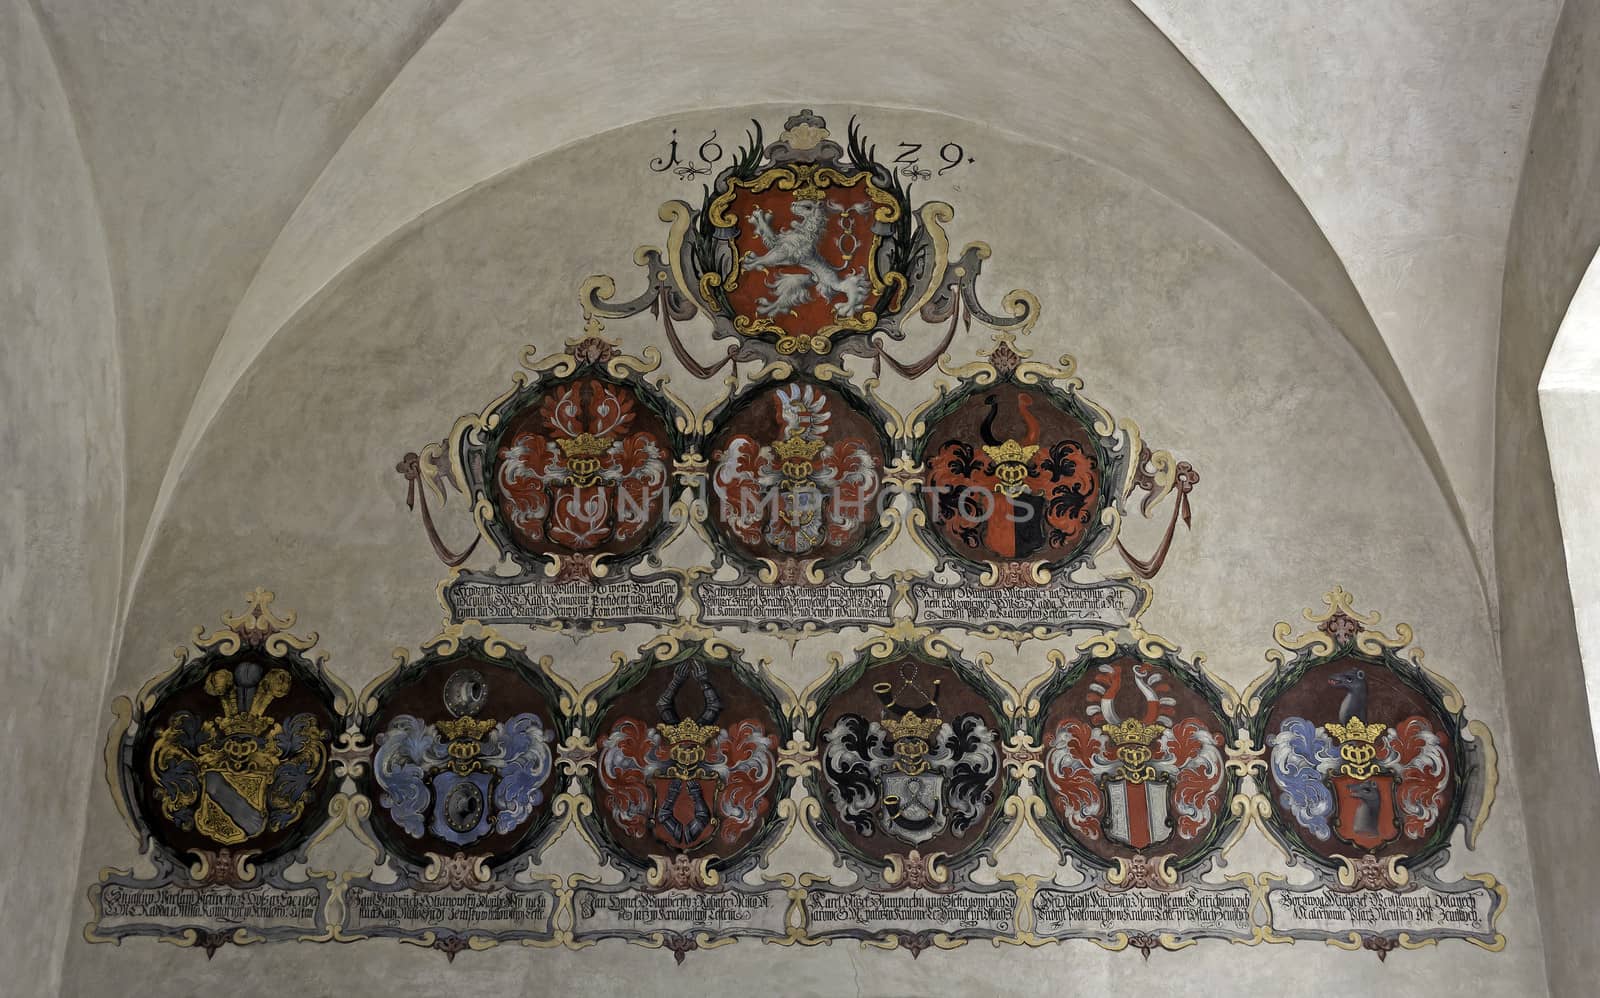 Display of medieval coats of arms, Prague Castle.